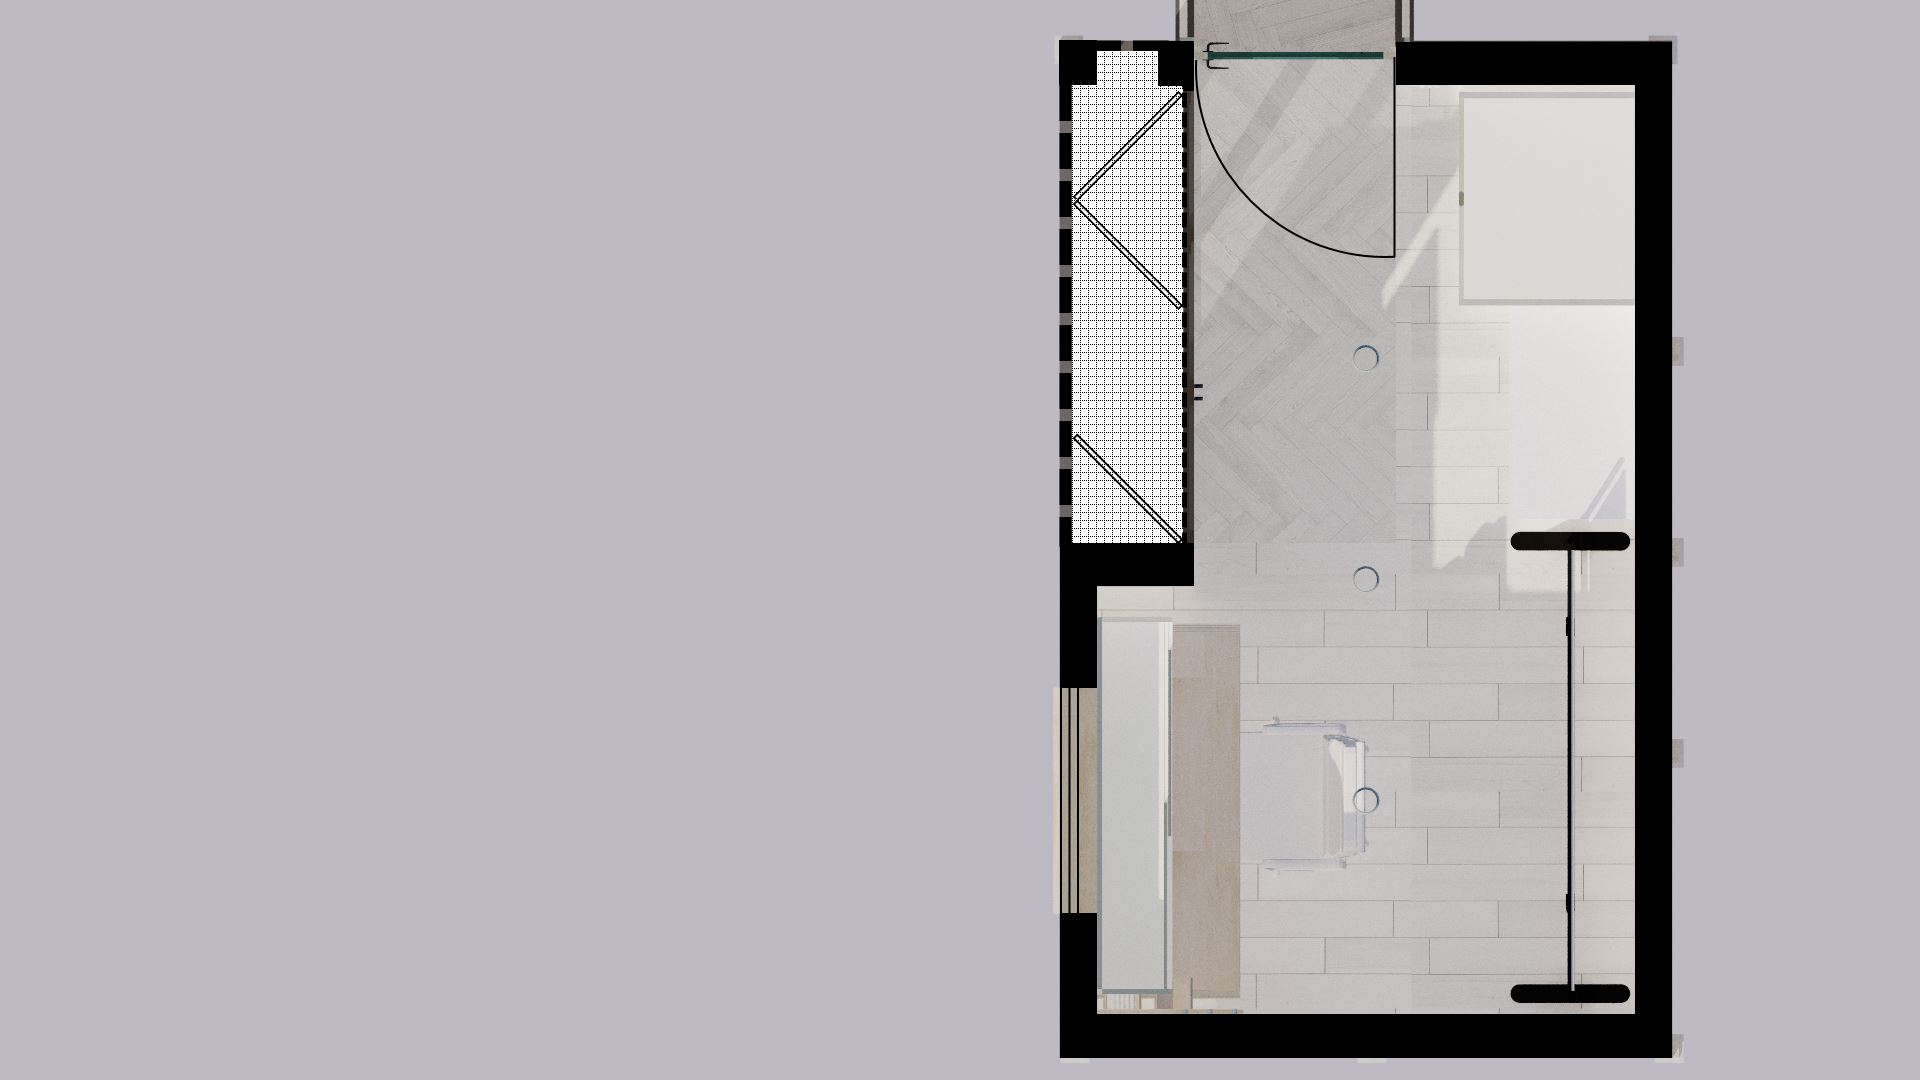 A plan view of the annexe.